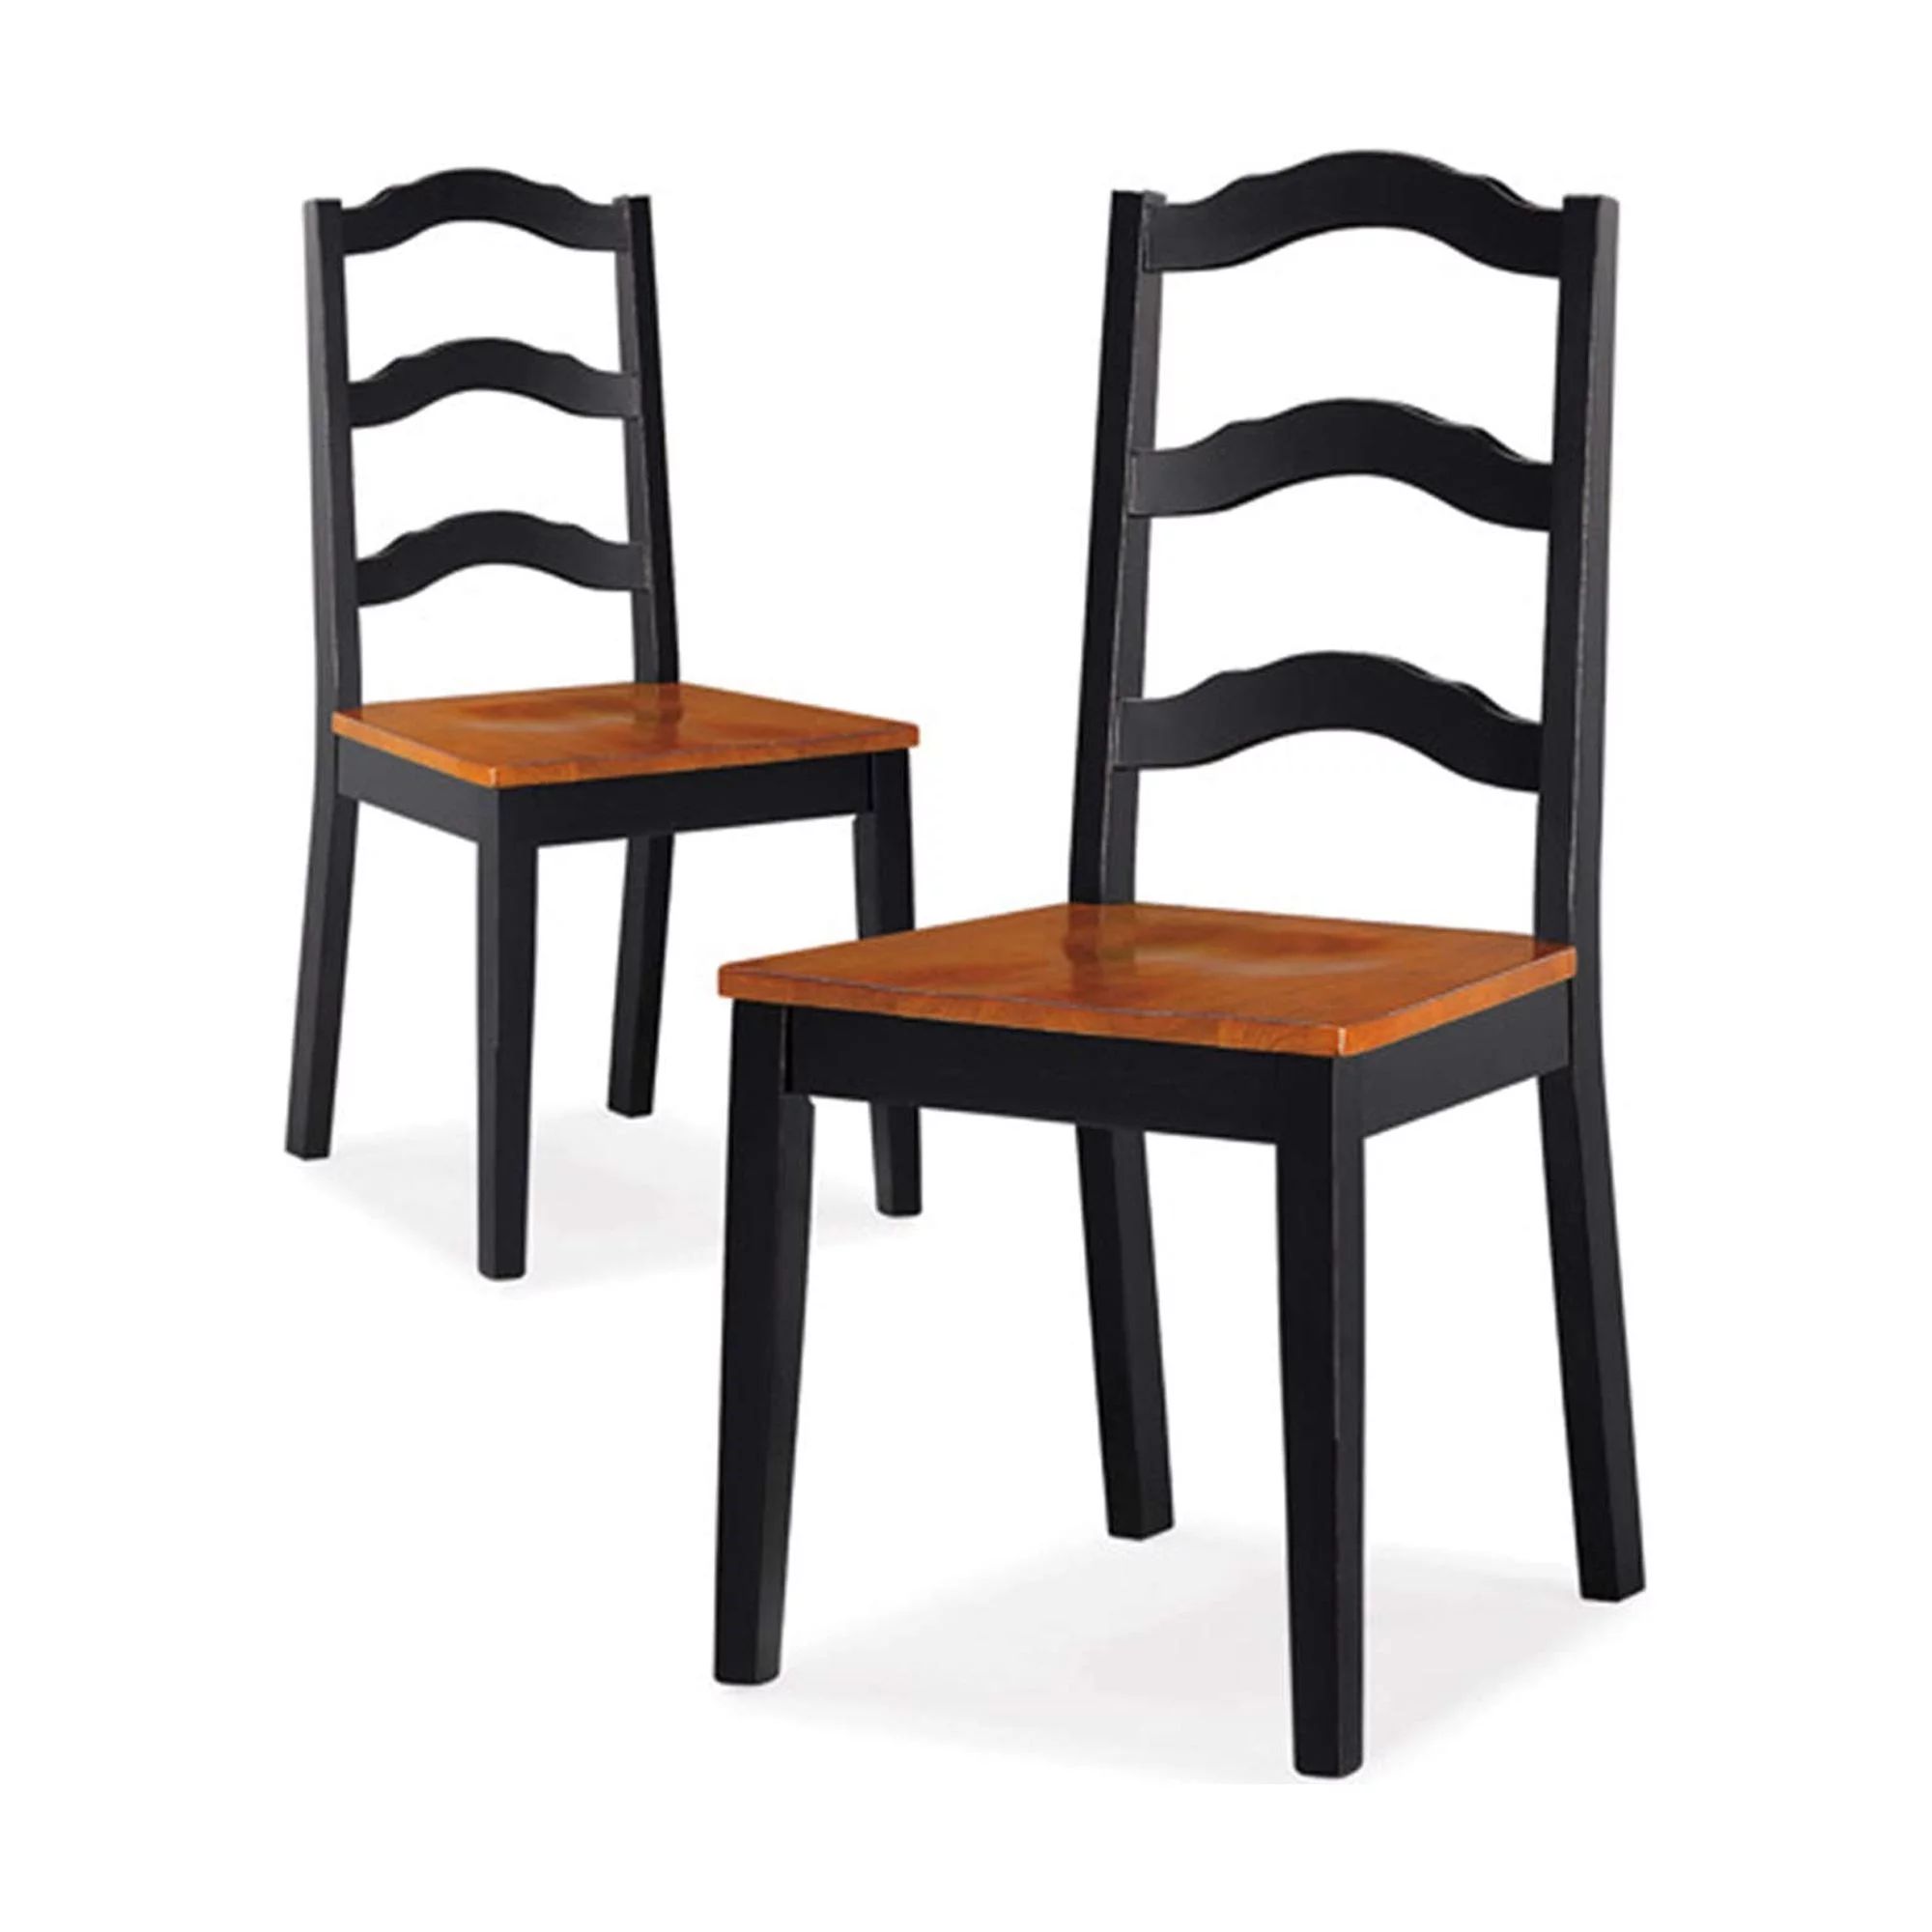 Better Homes and Gardens Autumn Lane Ladder Back Dining Chairs, Set of 2, Black and Oak | Walmart (US)